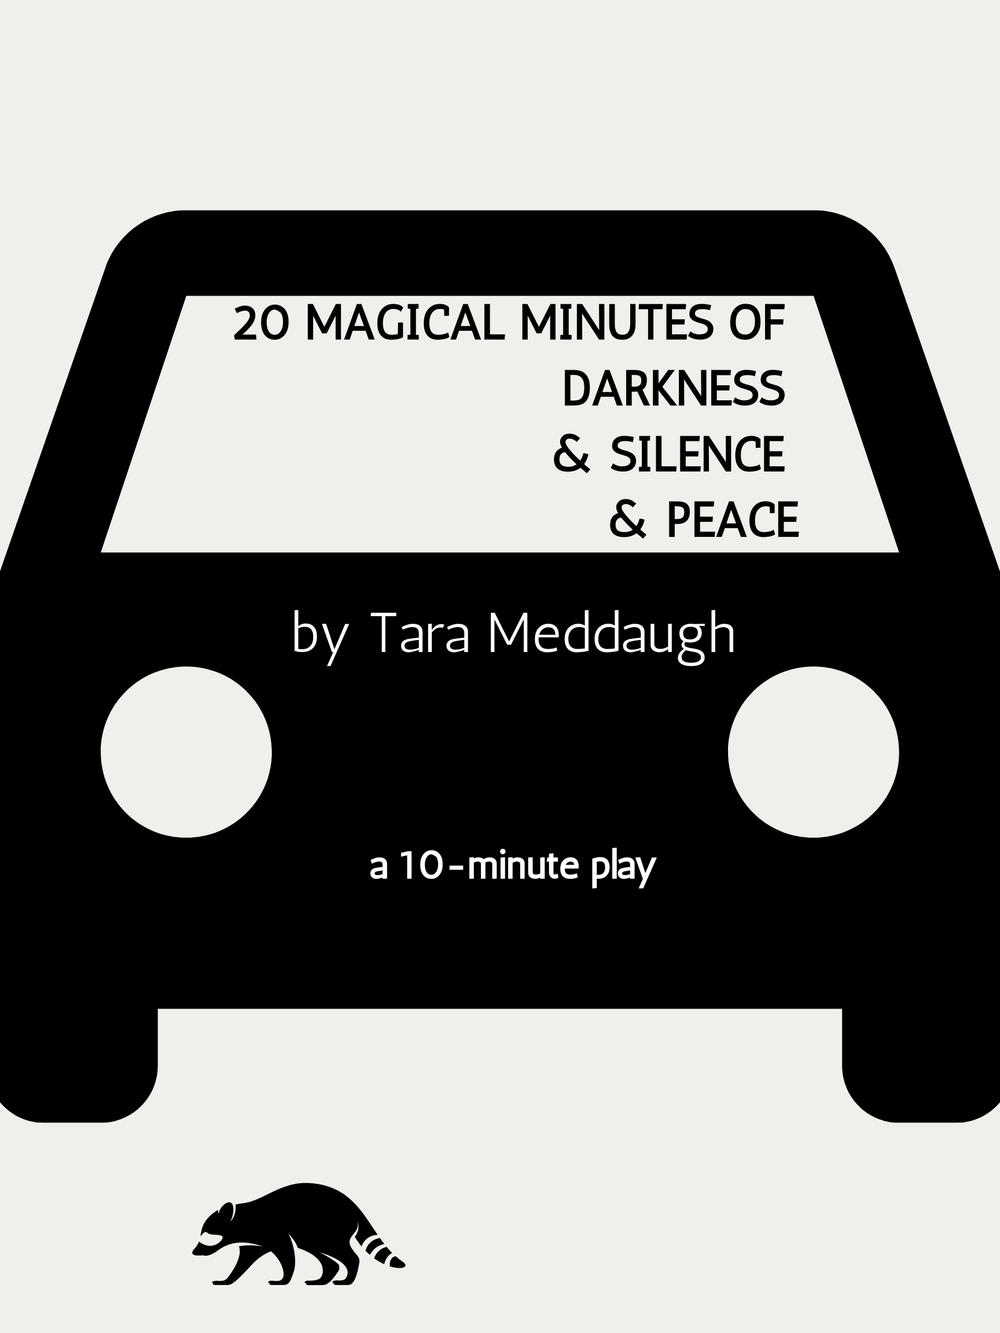 website 20 MAGICAL MINUTES OF DARKNESS AND SILENCE AND PEACE 10 min play.png